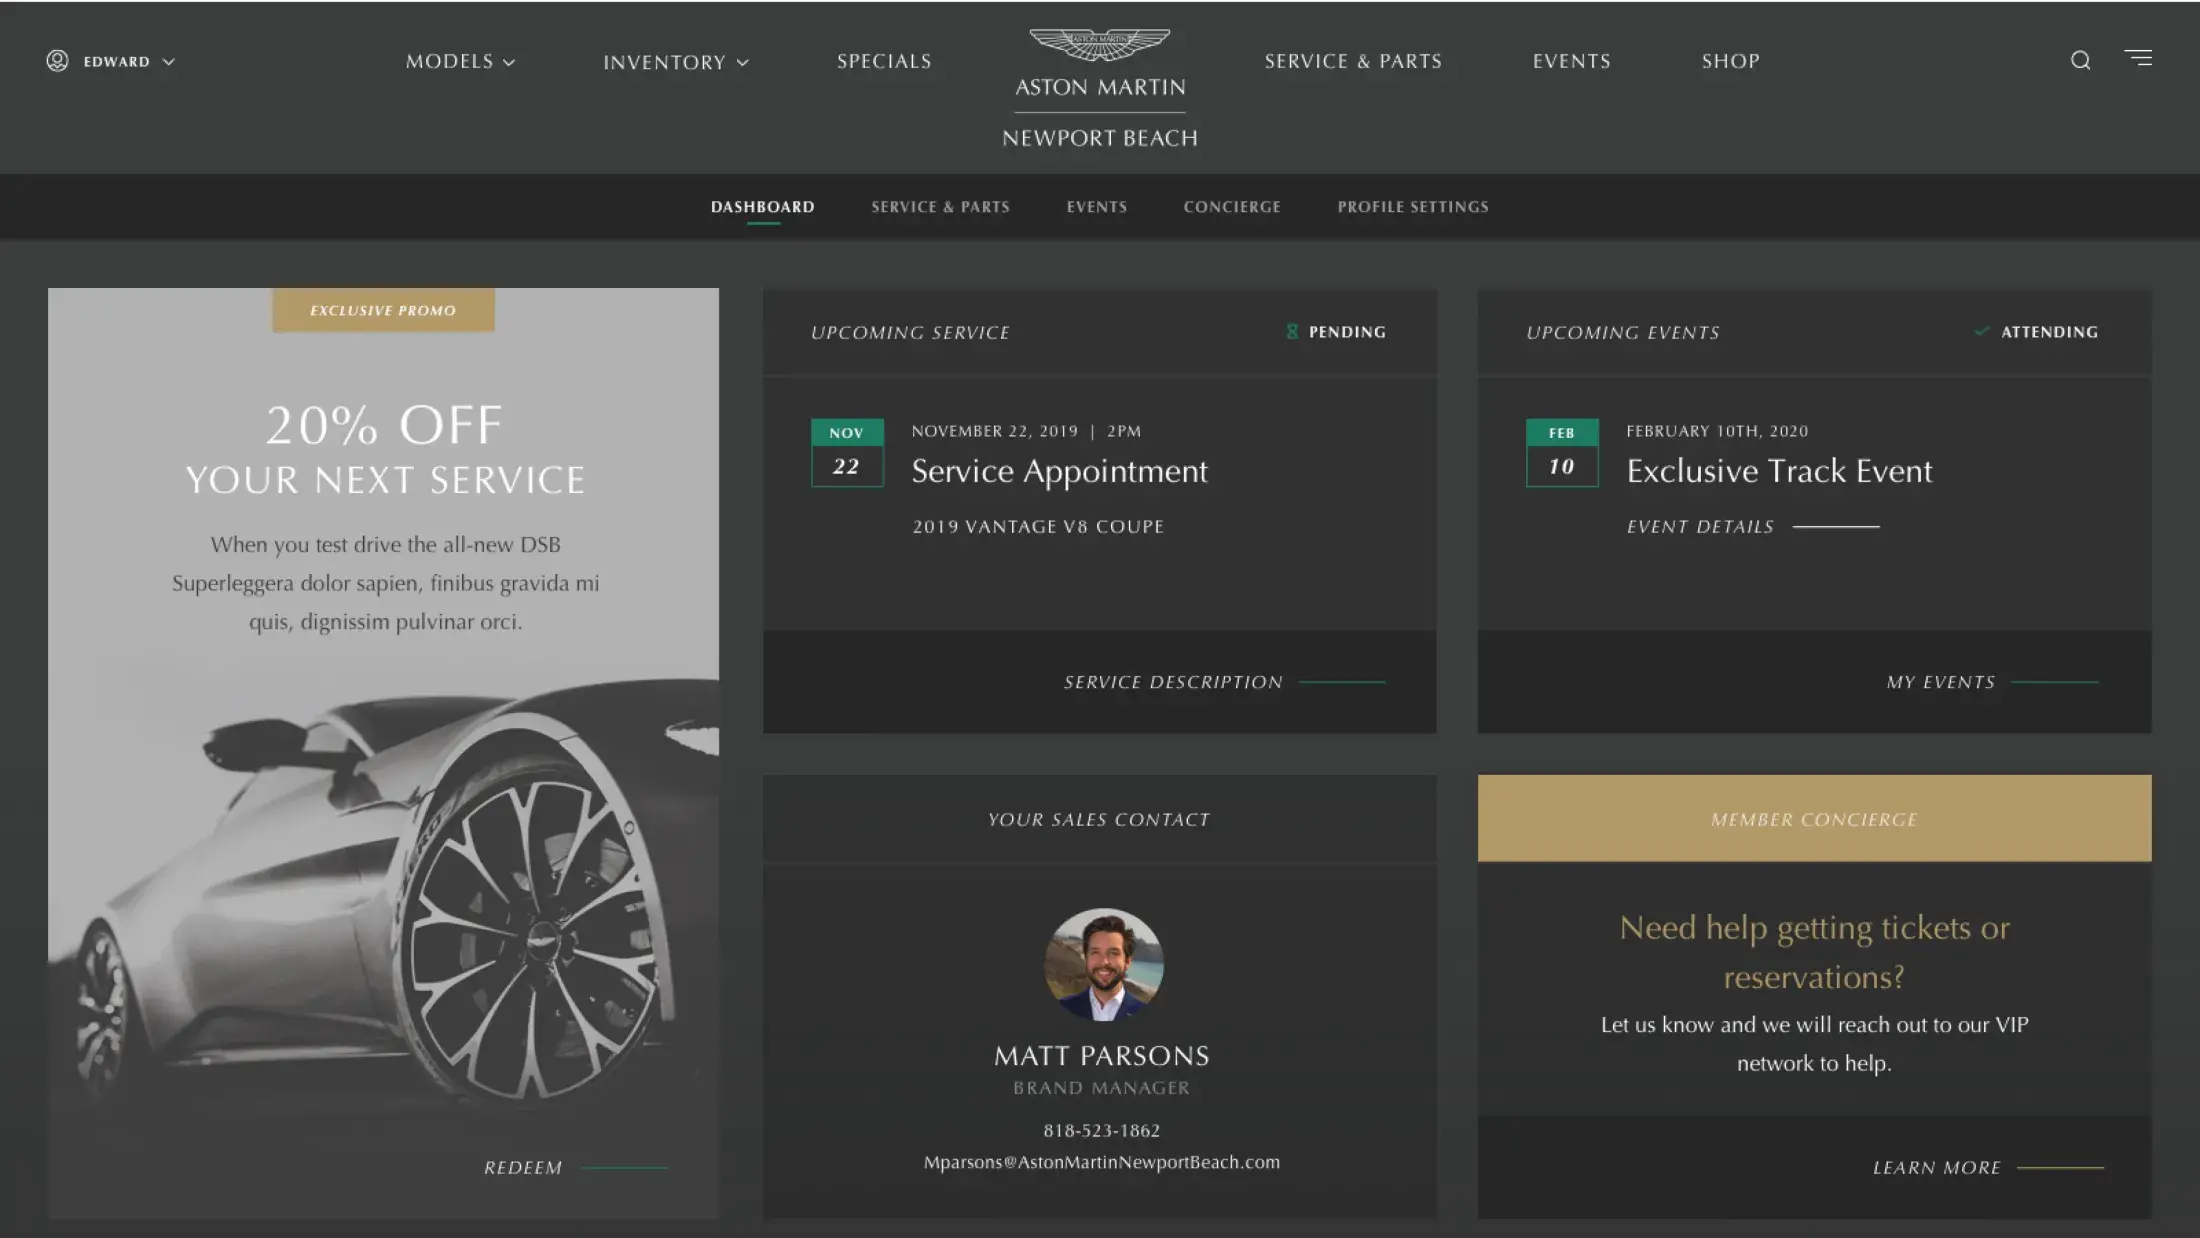 Aston Martin Newport Beach website dashboard featuring an exclusive promo, upcoming service, upcoming events, sales contact and member concierge